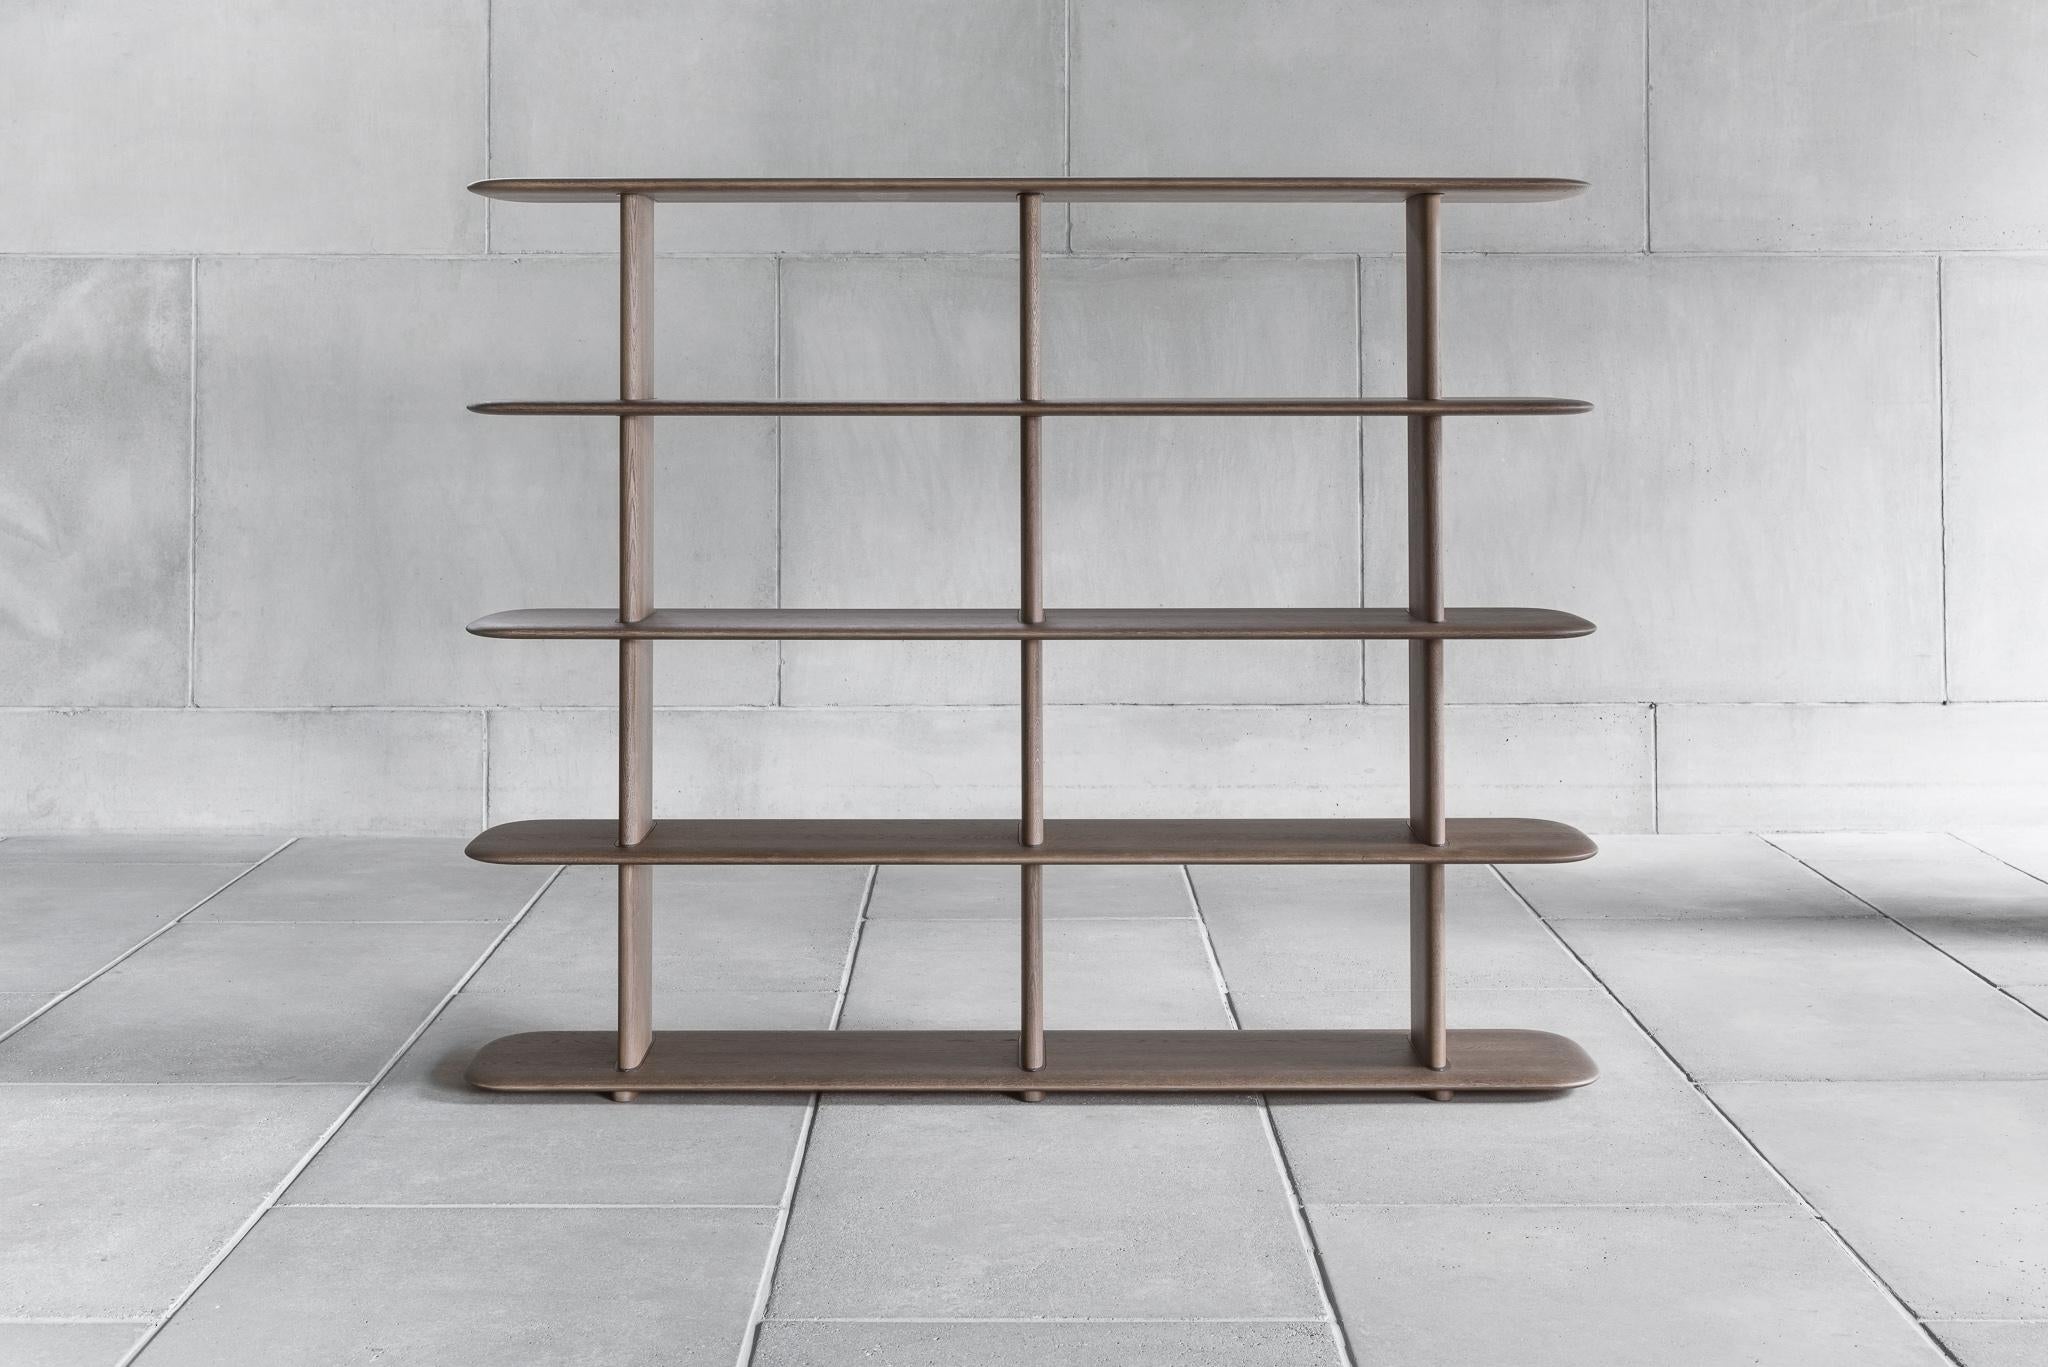 Graceful and poetic, yet robust, is its designers' description what the Poeme Shelf is all about. Designed by the Poiat Studio's co-founders, Timo Mikkonen and Antti Rouhunkoski, the shelf derives its influences from many different aspects and